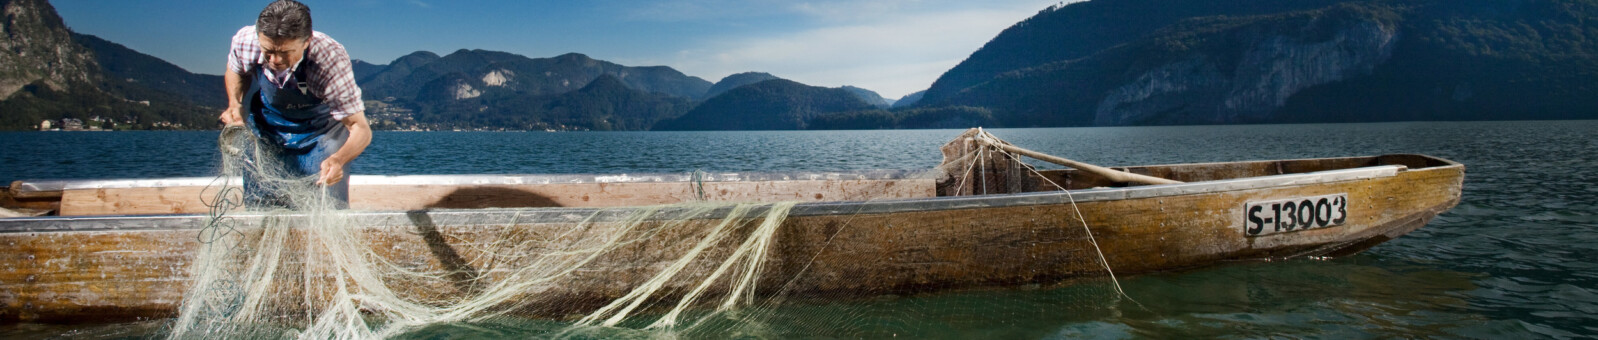     Fisherman with a net in a boat, SalzburgerLand 